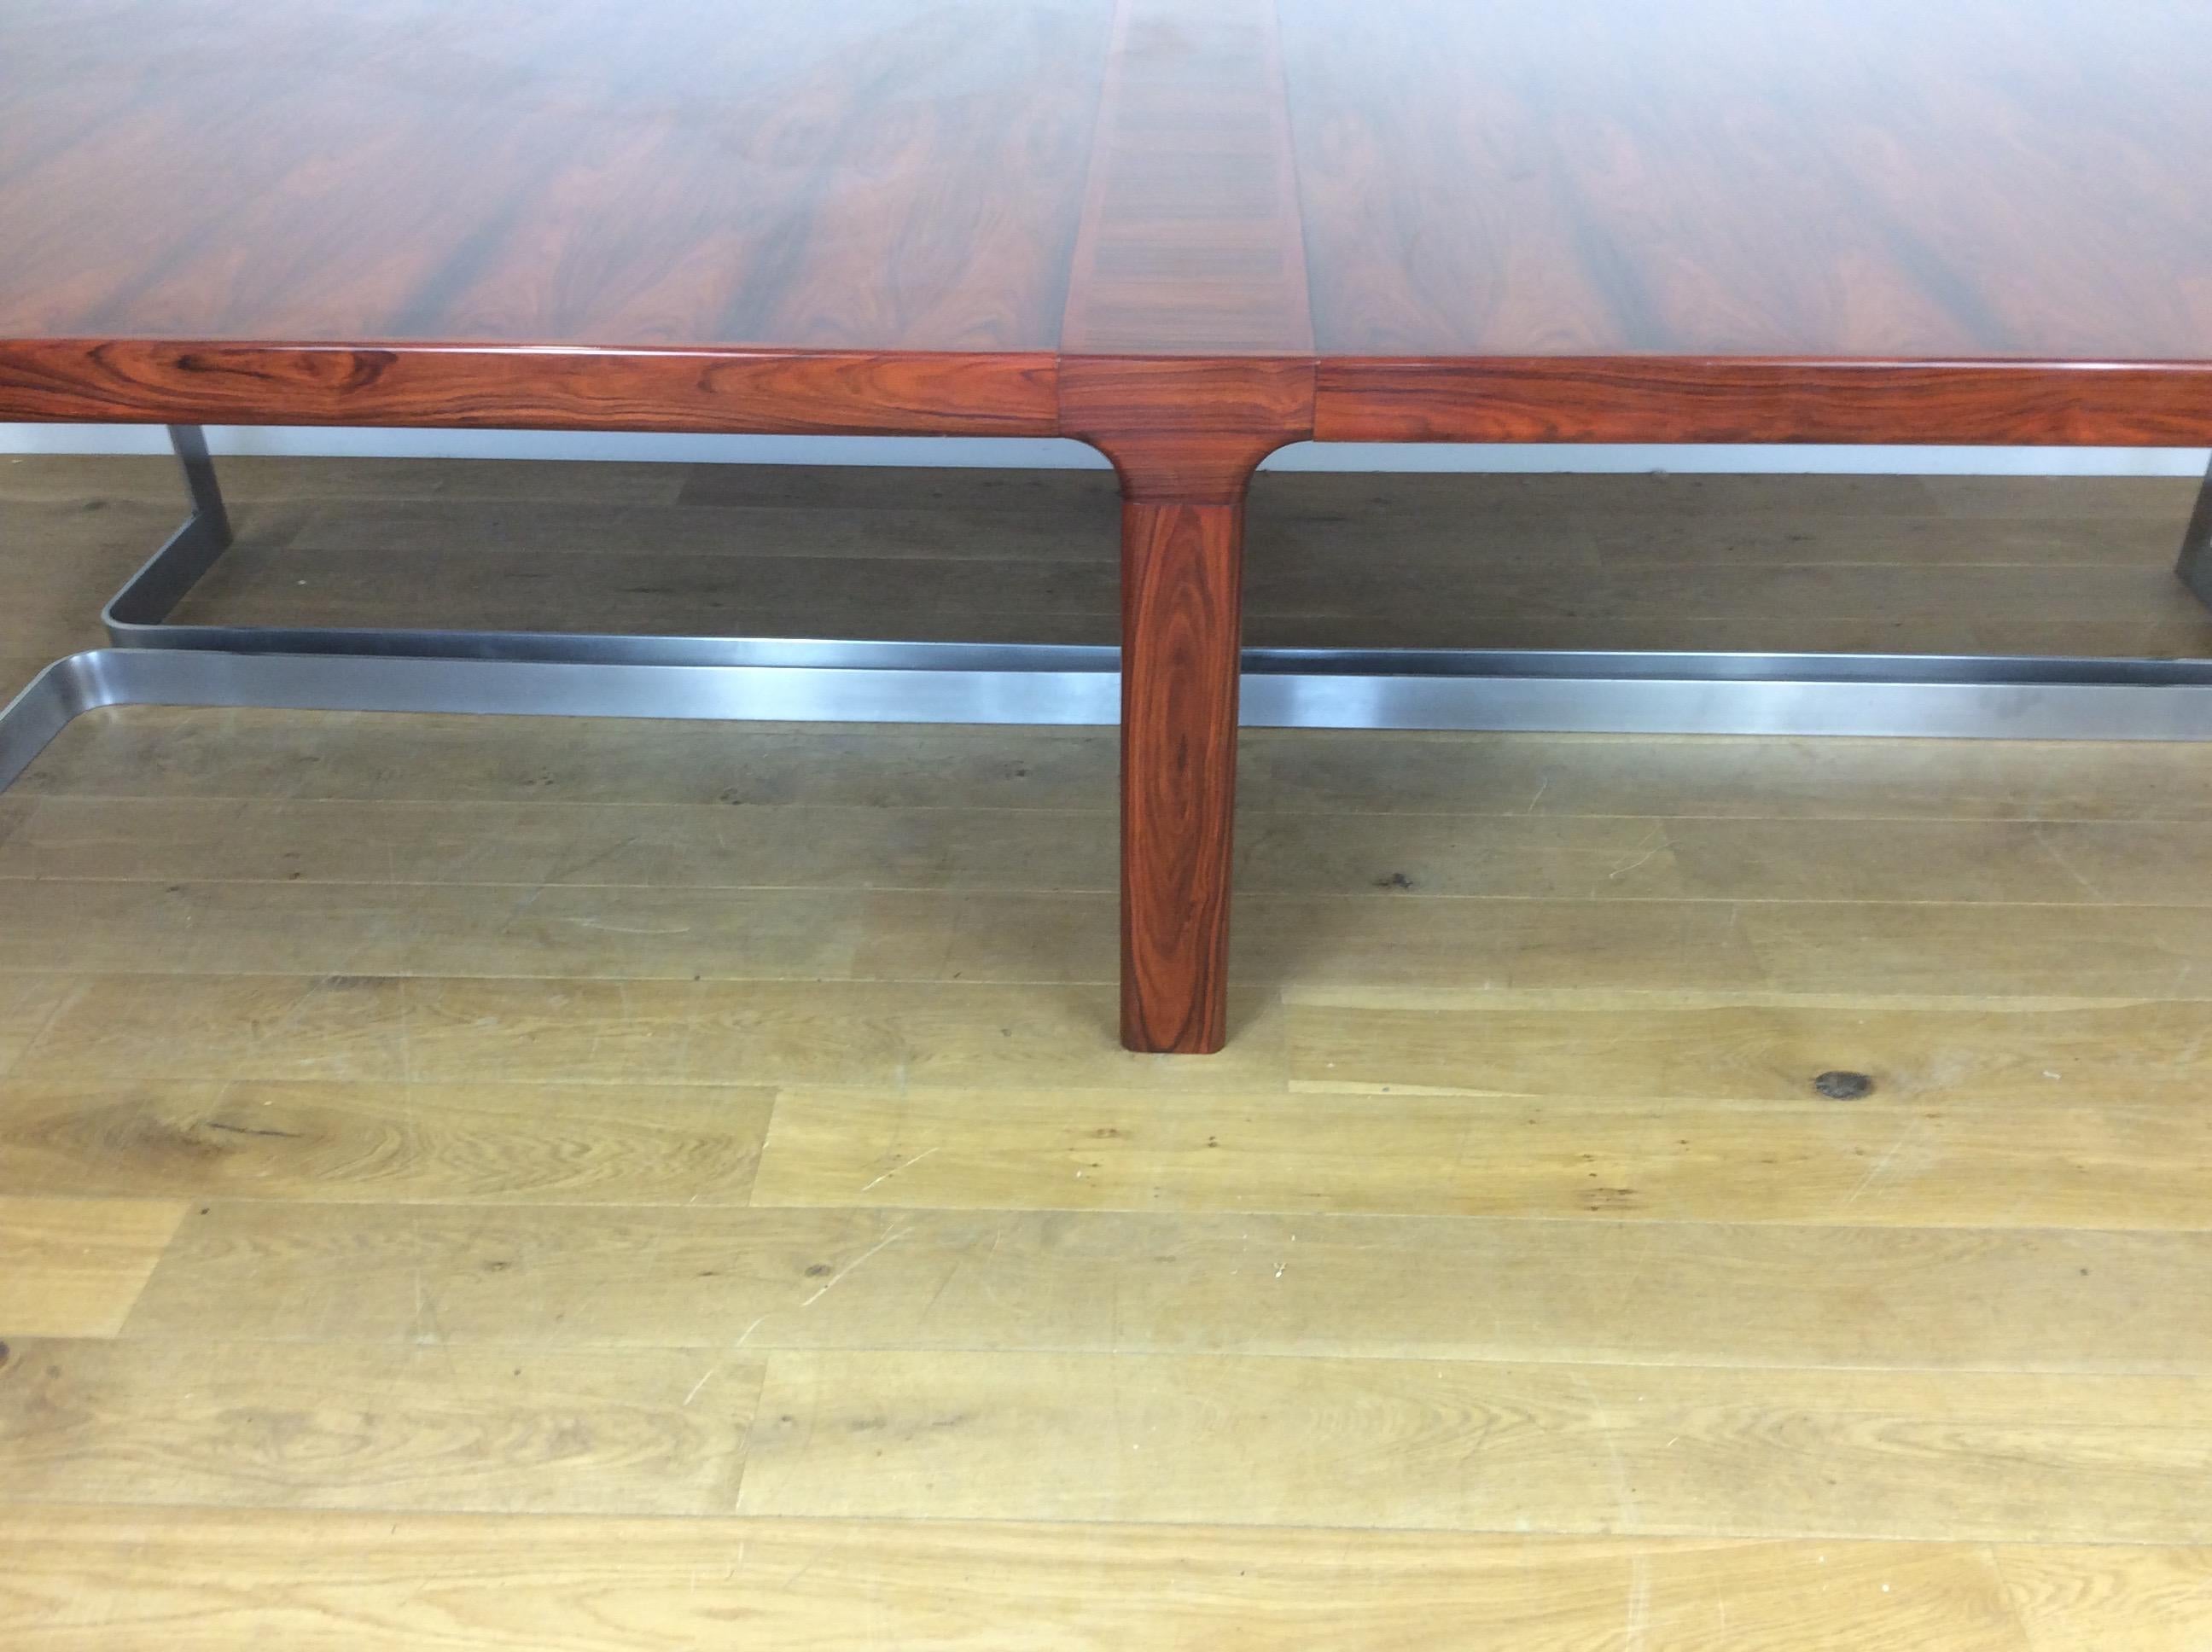 Midcentury rosewood conference table with polished steel support.
beautiful grain to this rich rosewood table, the table disassemble for ease of transport or re positioning.
Very high quality and beautifully crafted.
72 cm H 65 cm H to the bottom